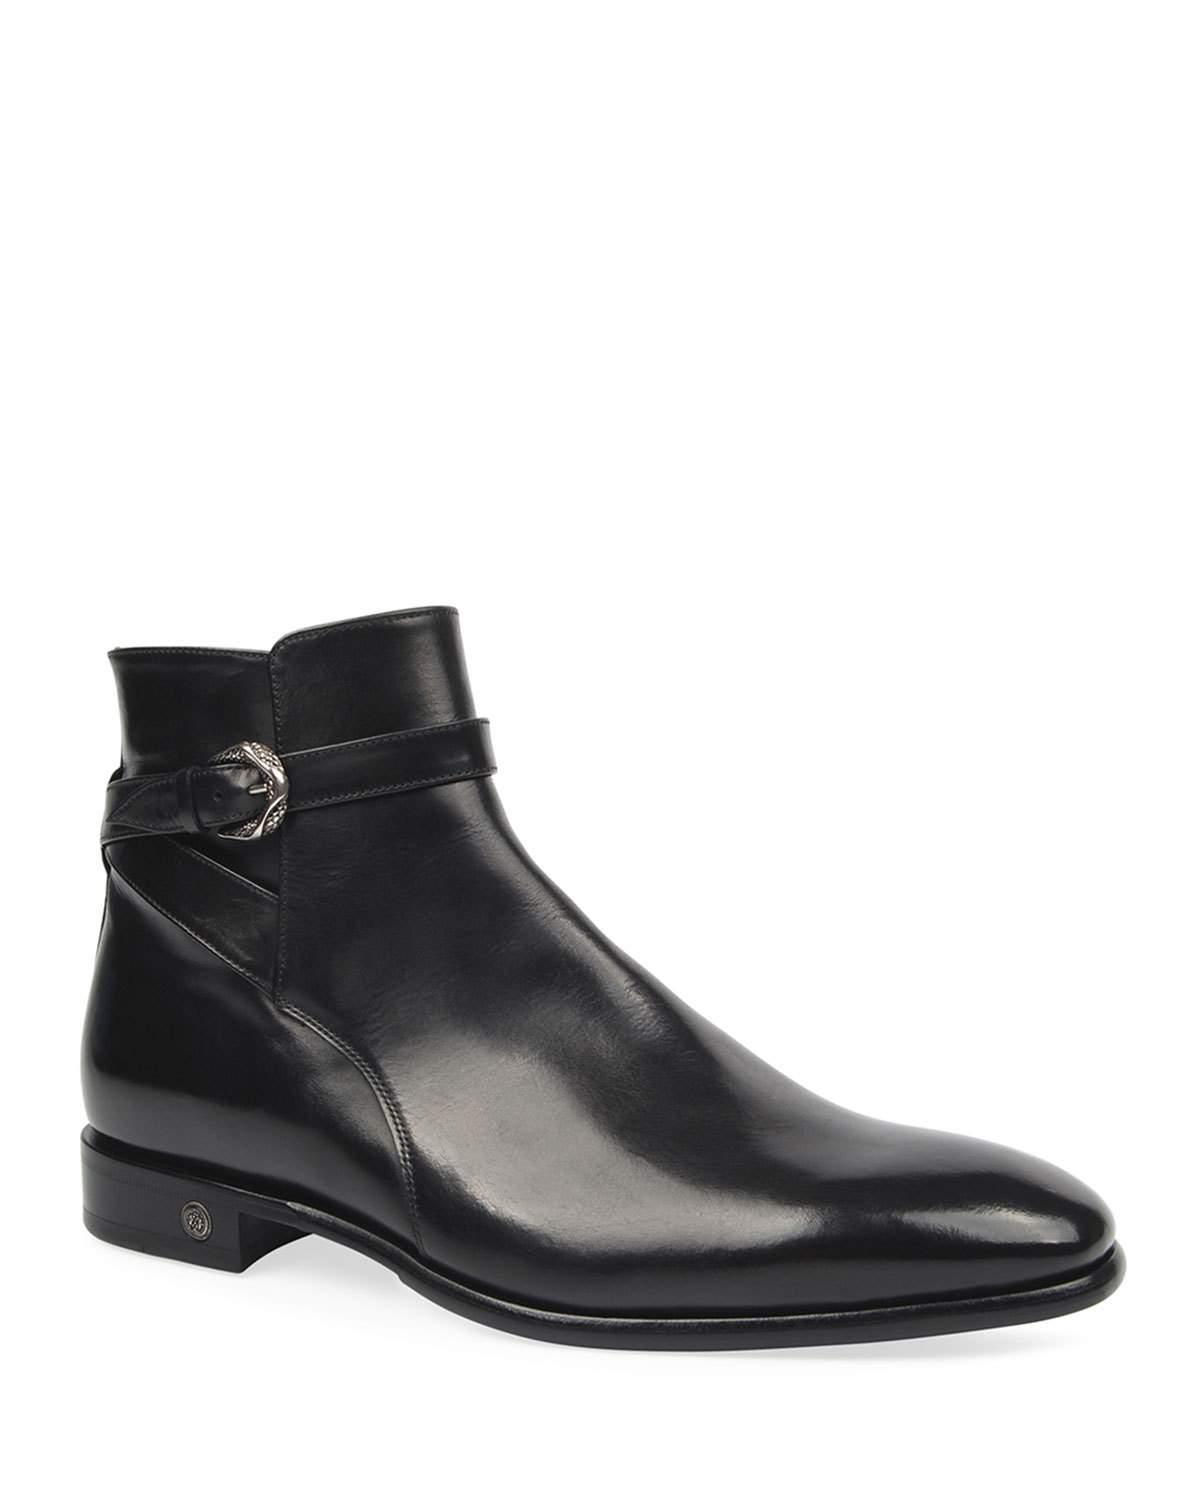 Roberto Cavalli Men's Leather Side-zip Ankle Boots W/ Buckle Strap in ...